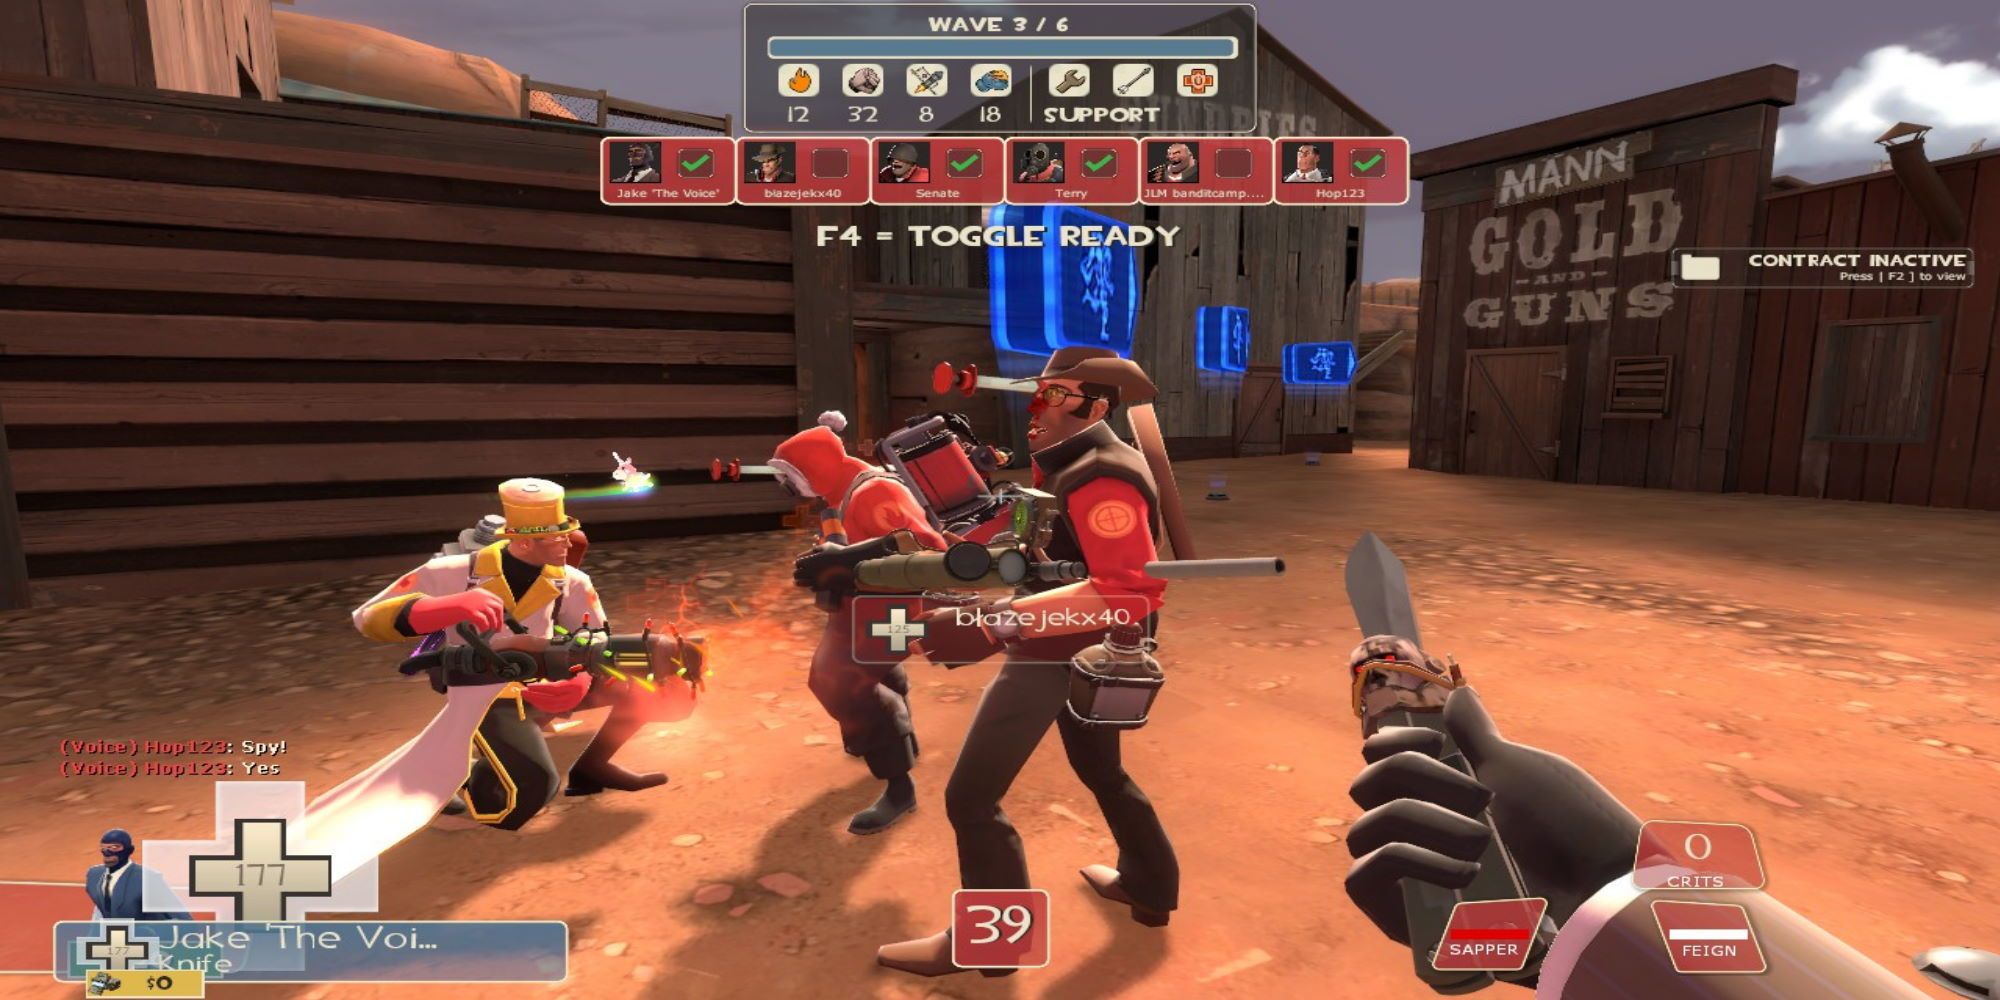 A Medic healing and looking at a Pyro and Sniper with healing darts in their faces while a Spy watches, knife-equipped in Team Fortress 2